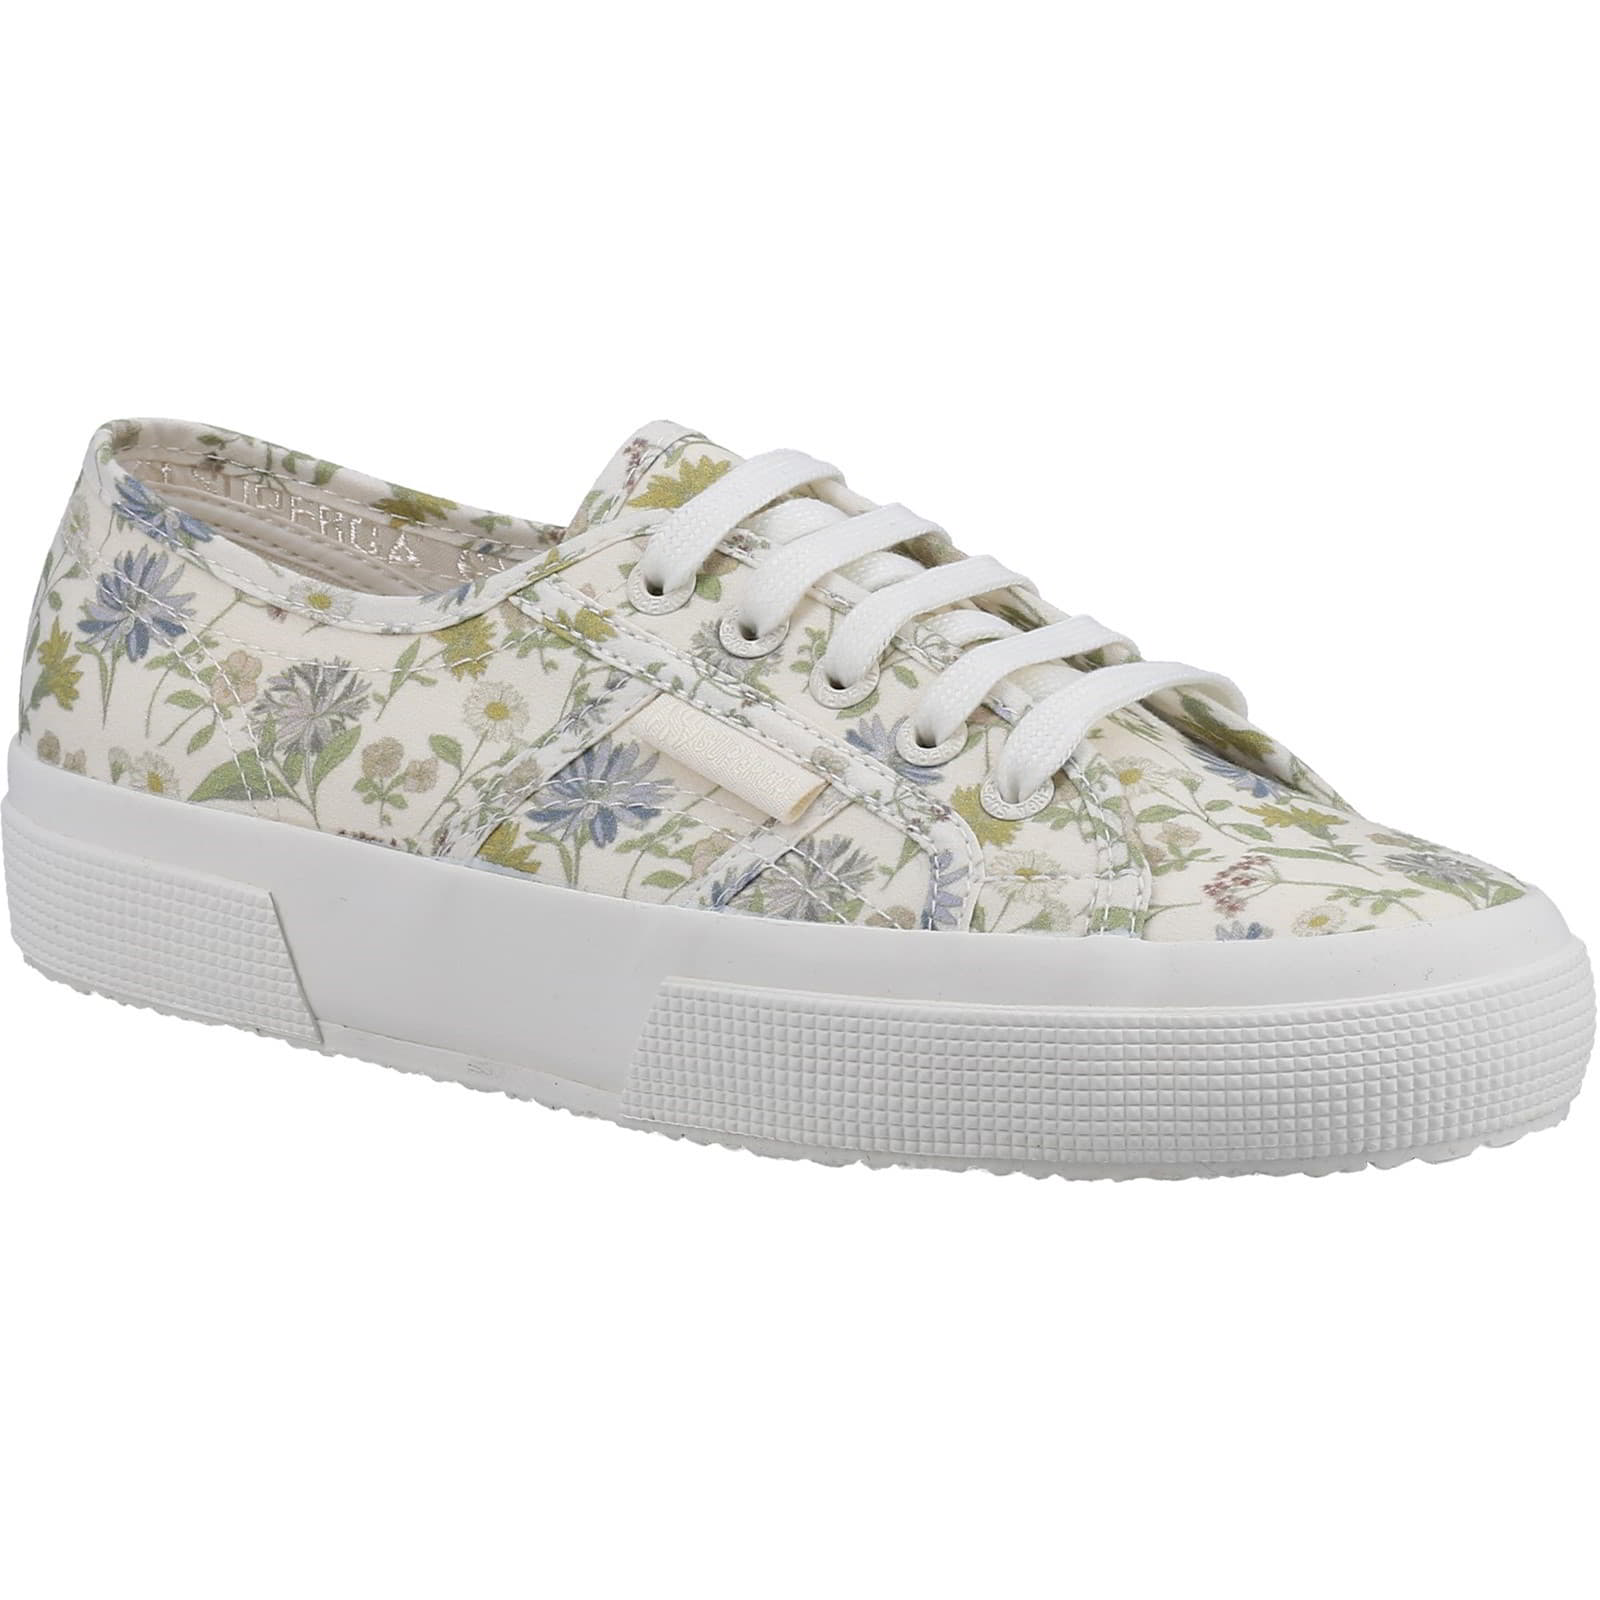 Superga Women's 2750 Floral Print Lace Up Trainers Shoes - UK 5